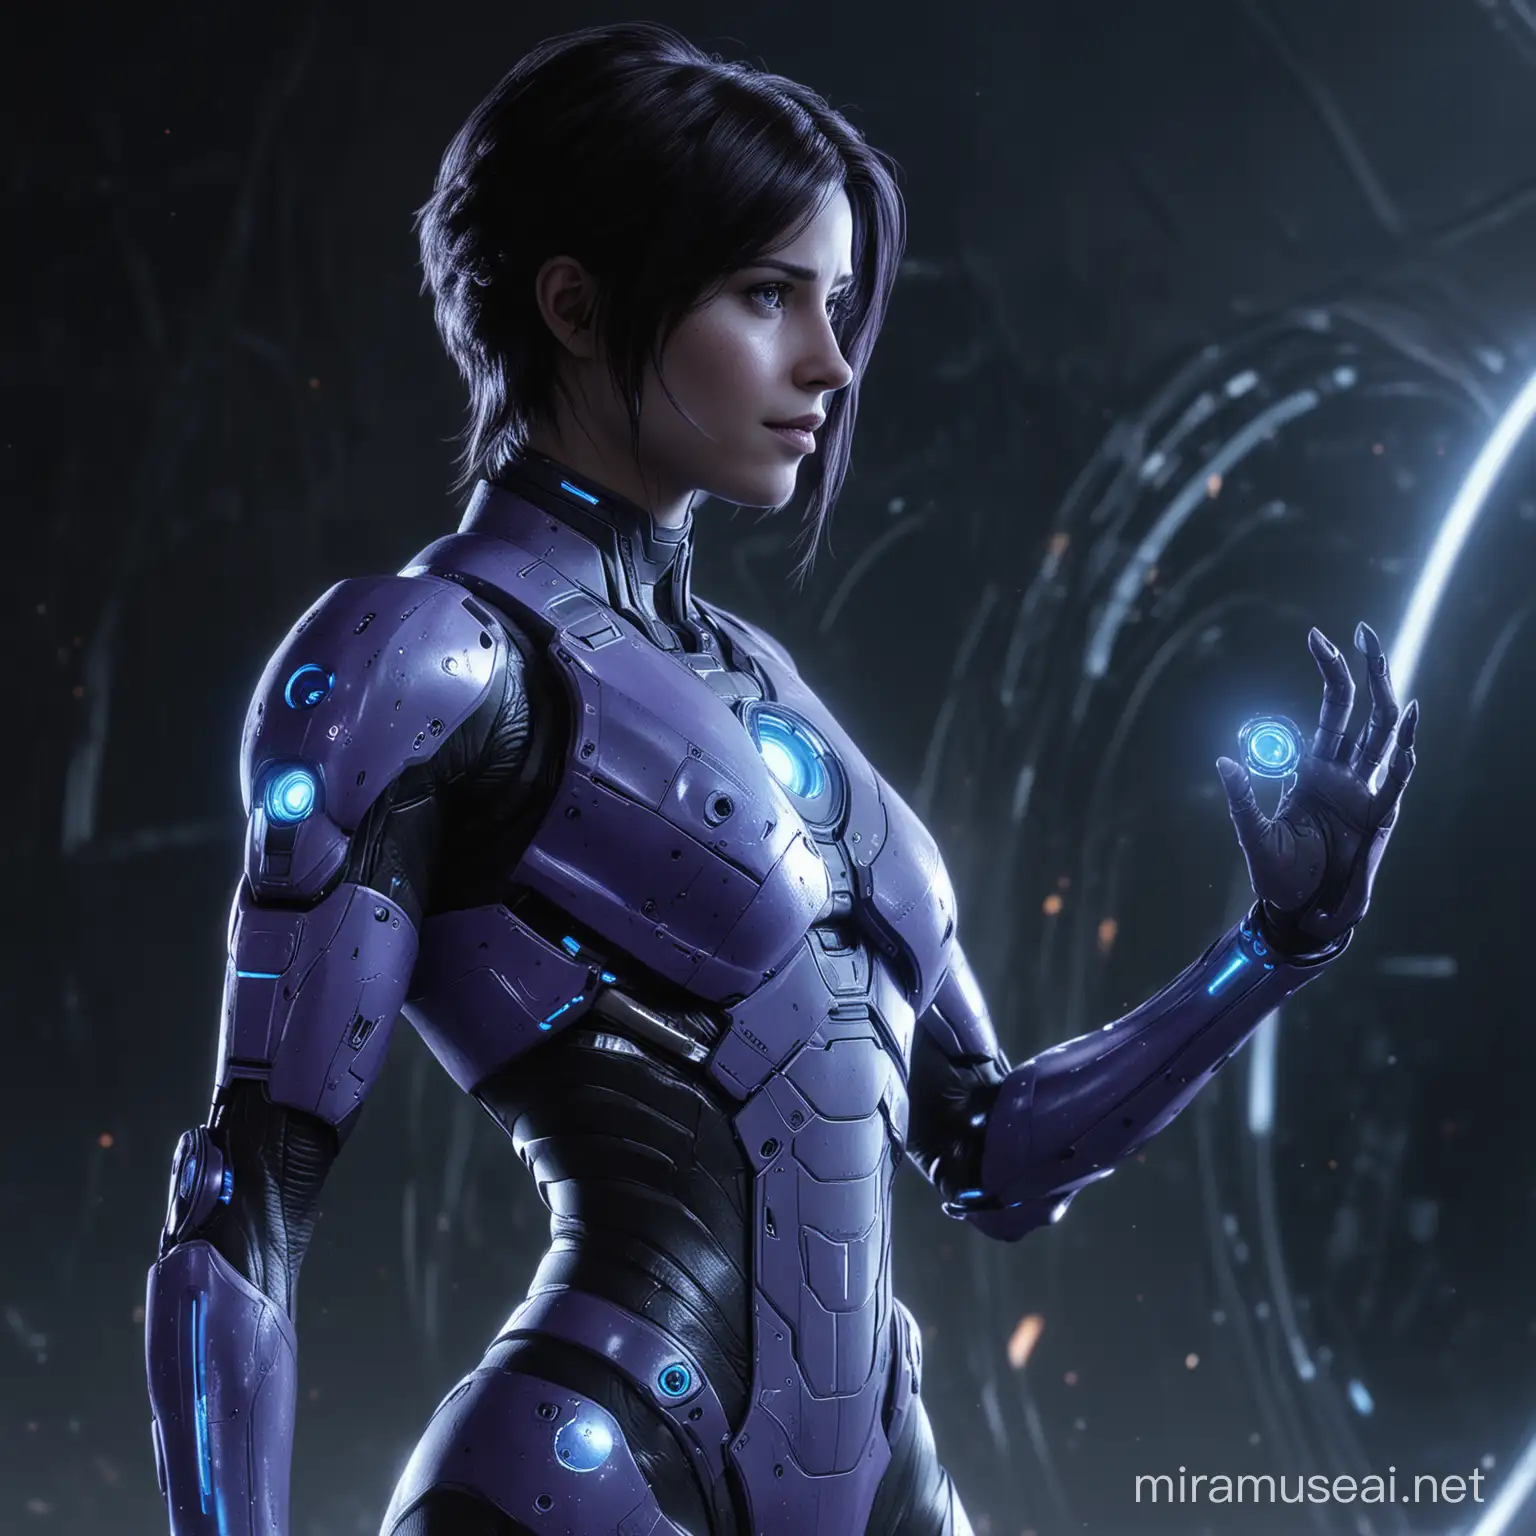 8k wallpaper of cortana from the Halo game, purple gleam, her left hand on her hip, in the background the Halo ring, 1.4:1 ratio